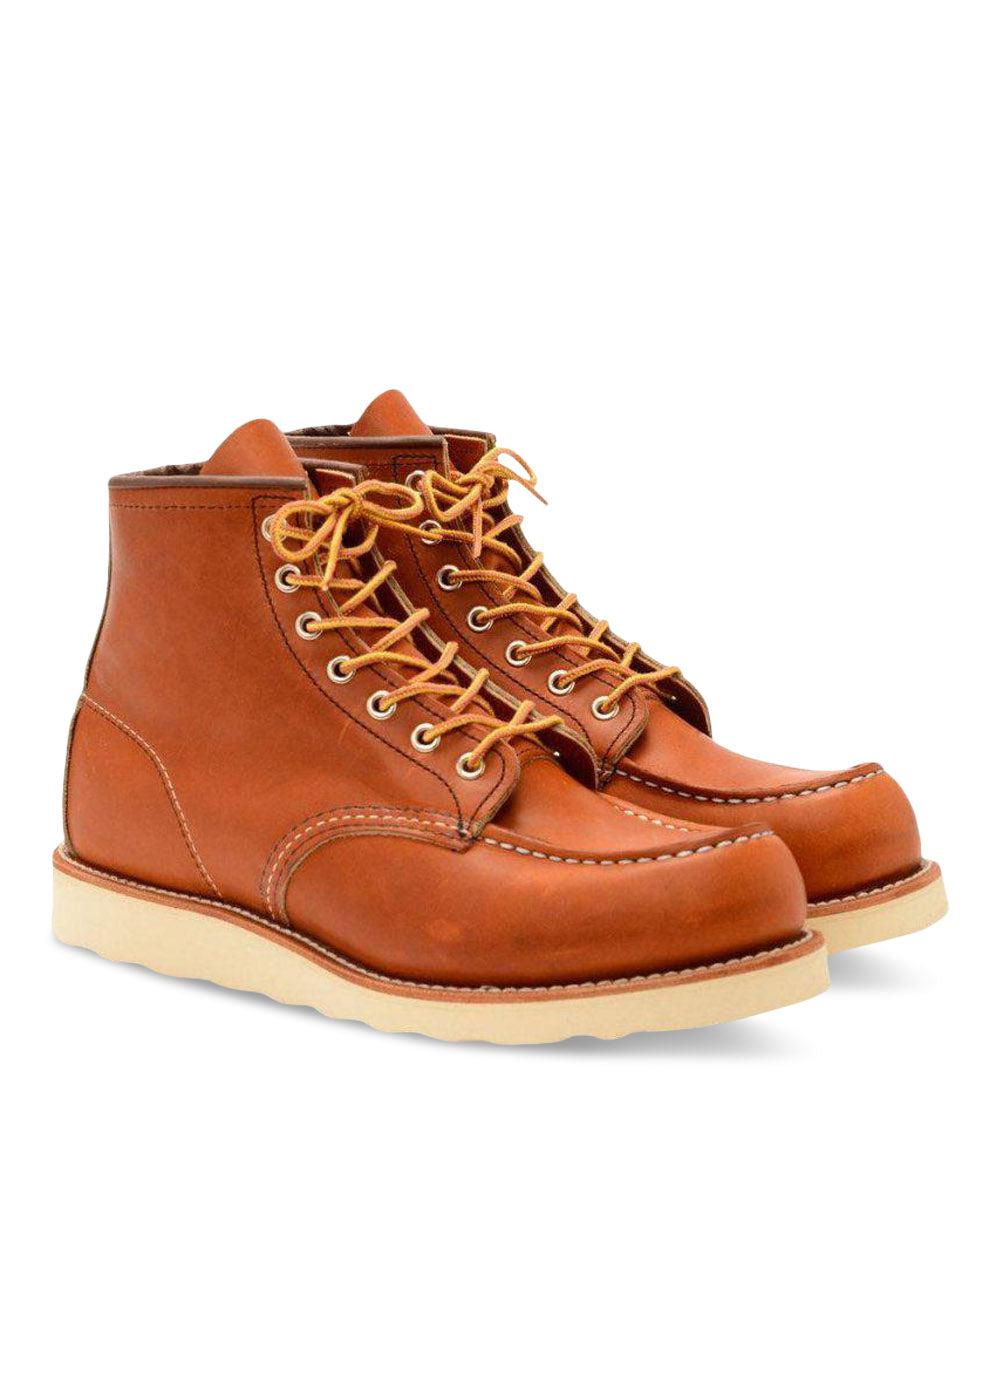 Red Wings Classic Moc - Cuoio. Køb støvler her.